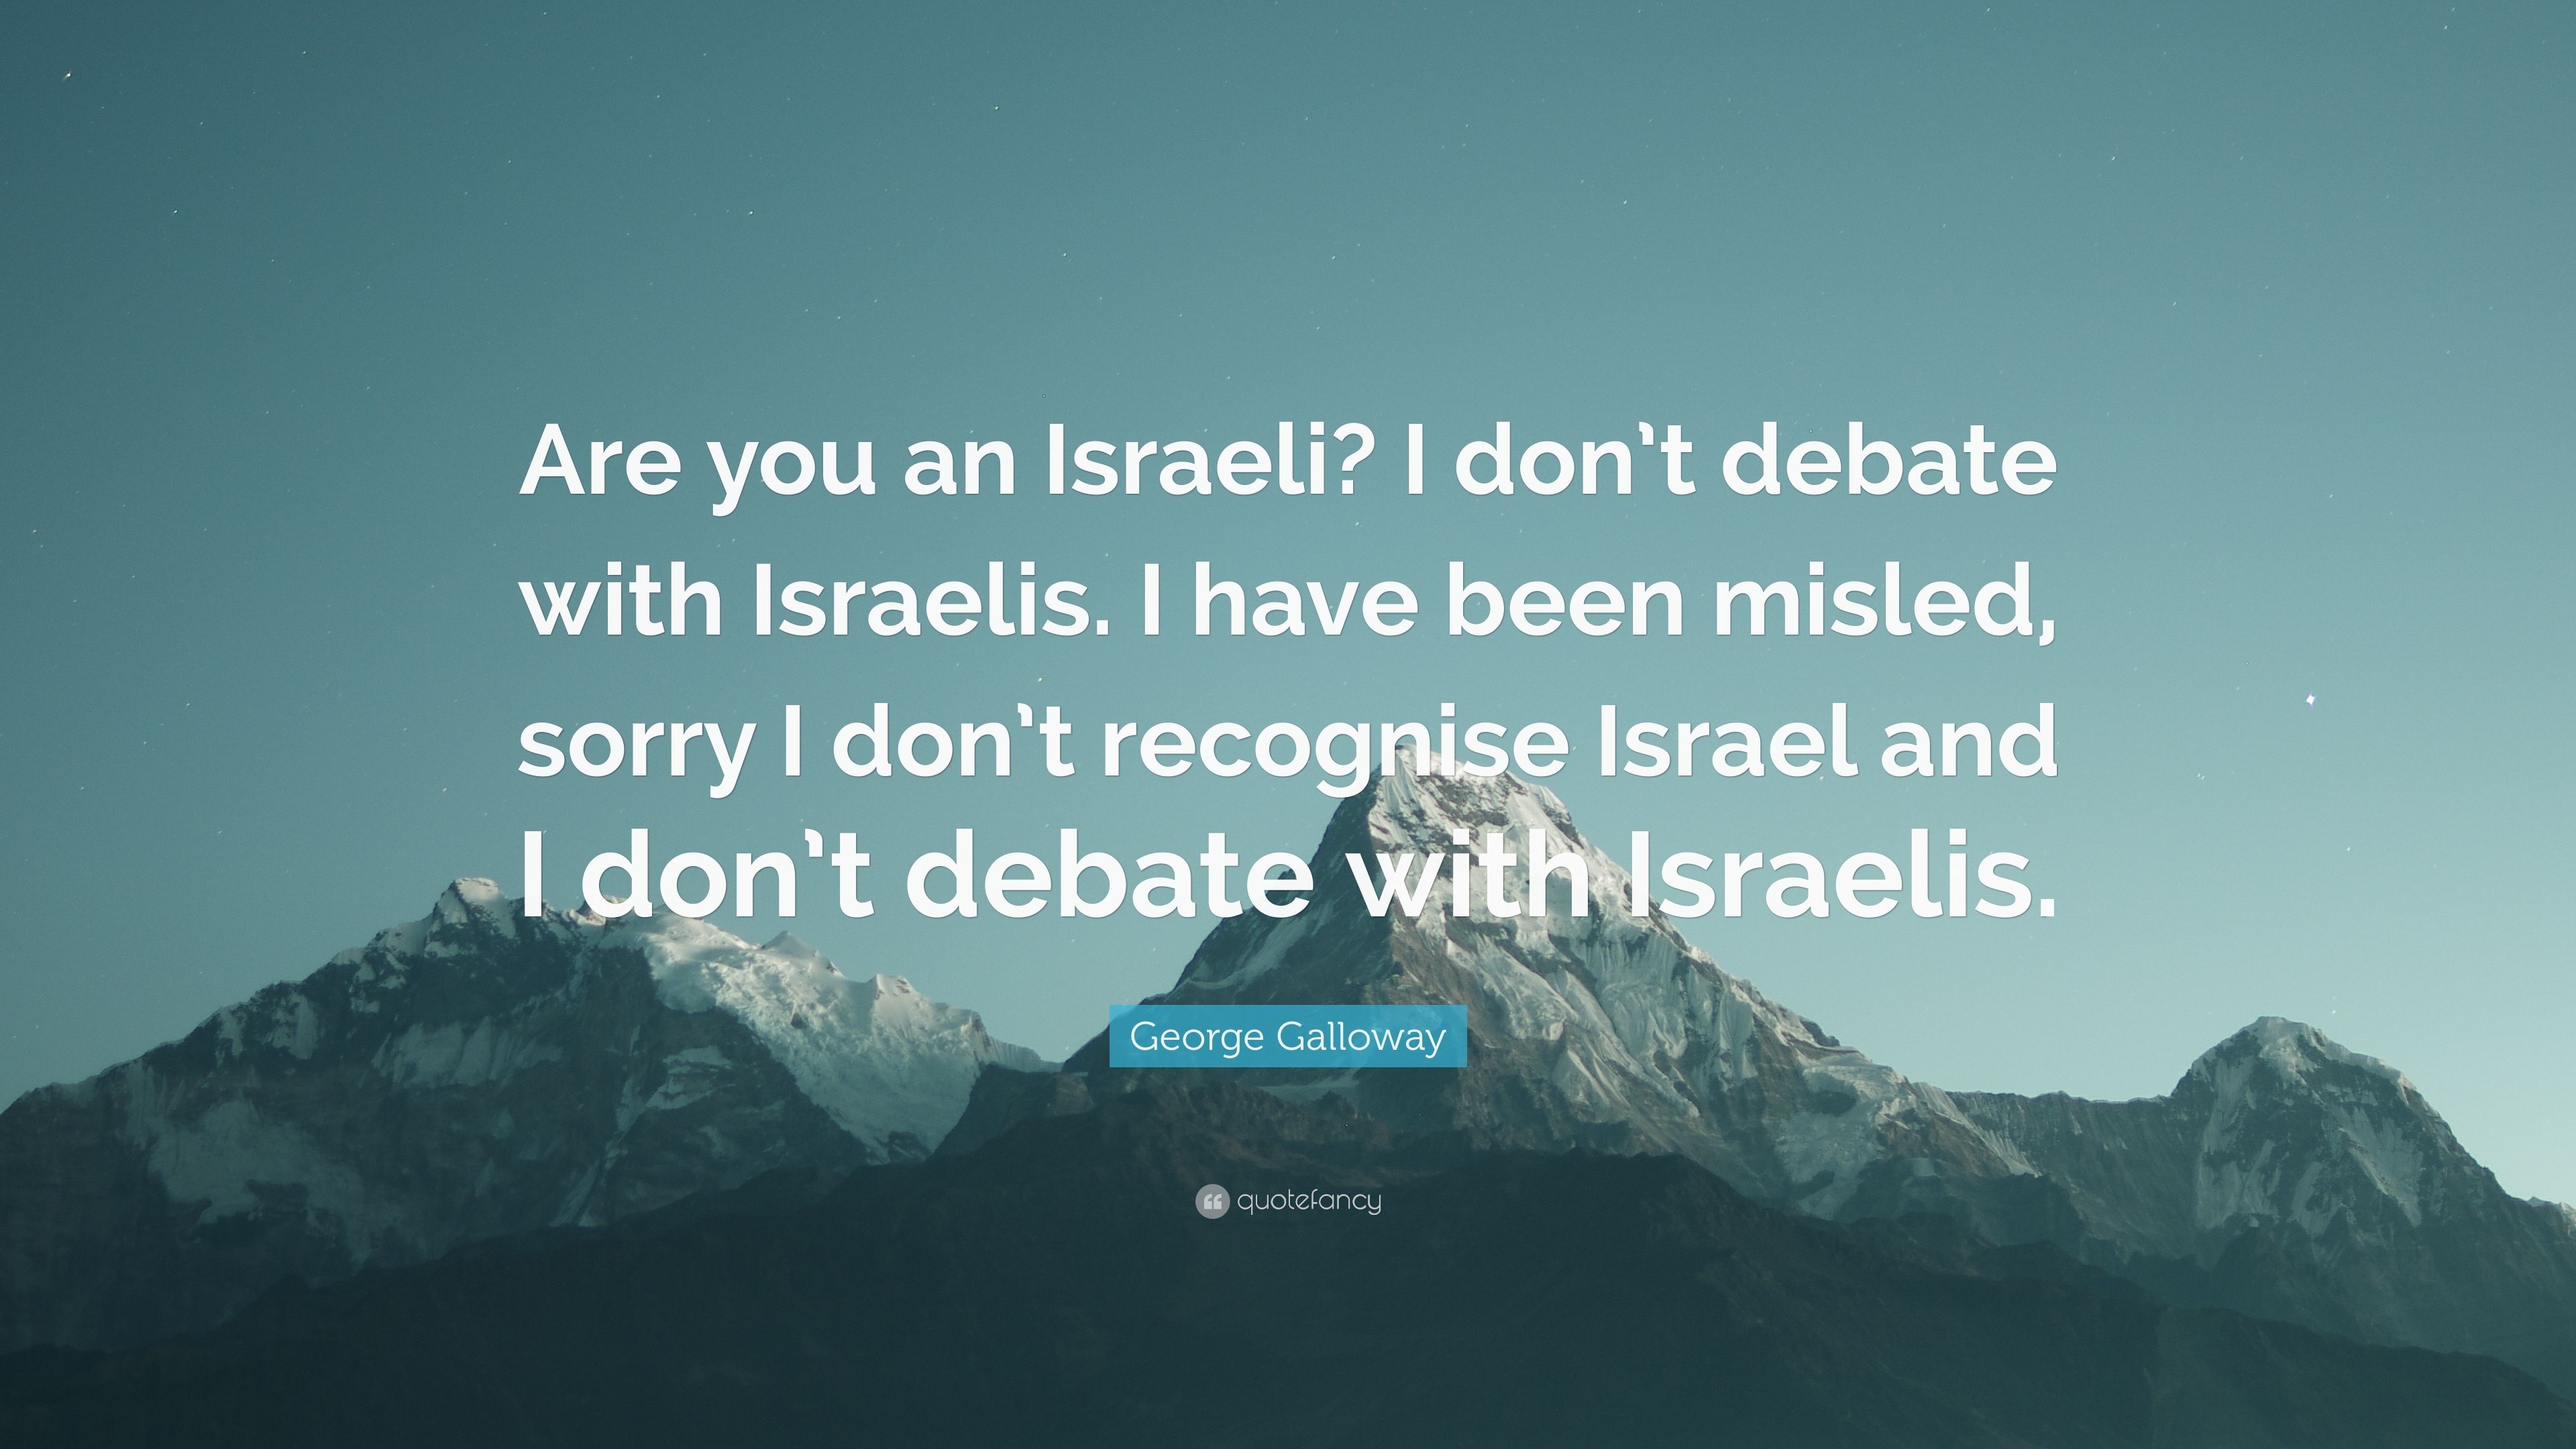 George Galloway Quote: “Are you an Israeli? I don't debate